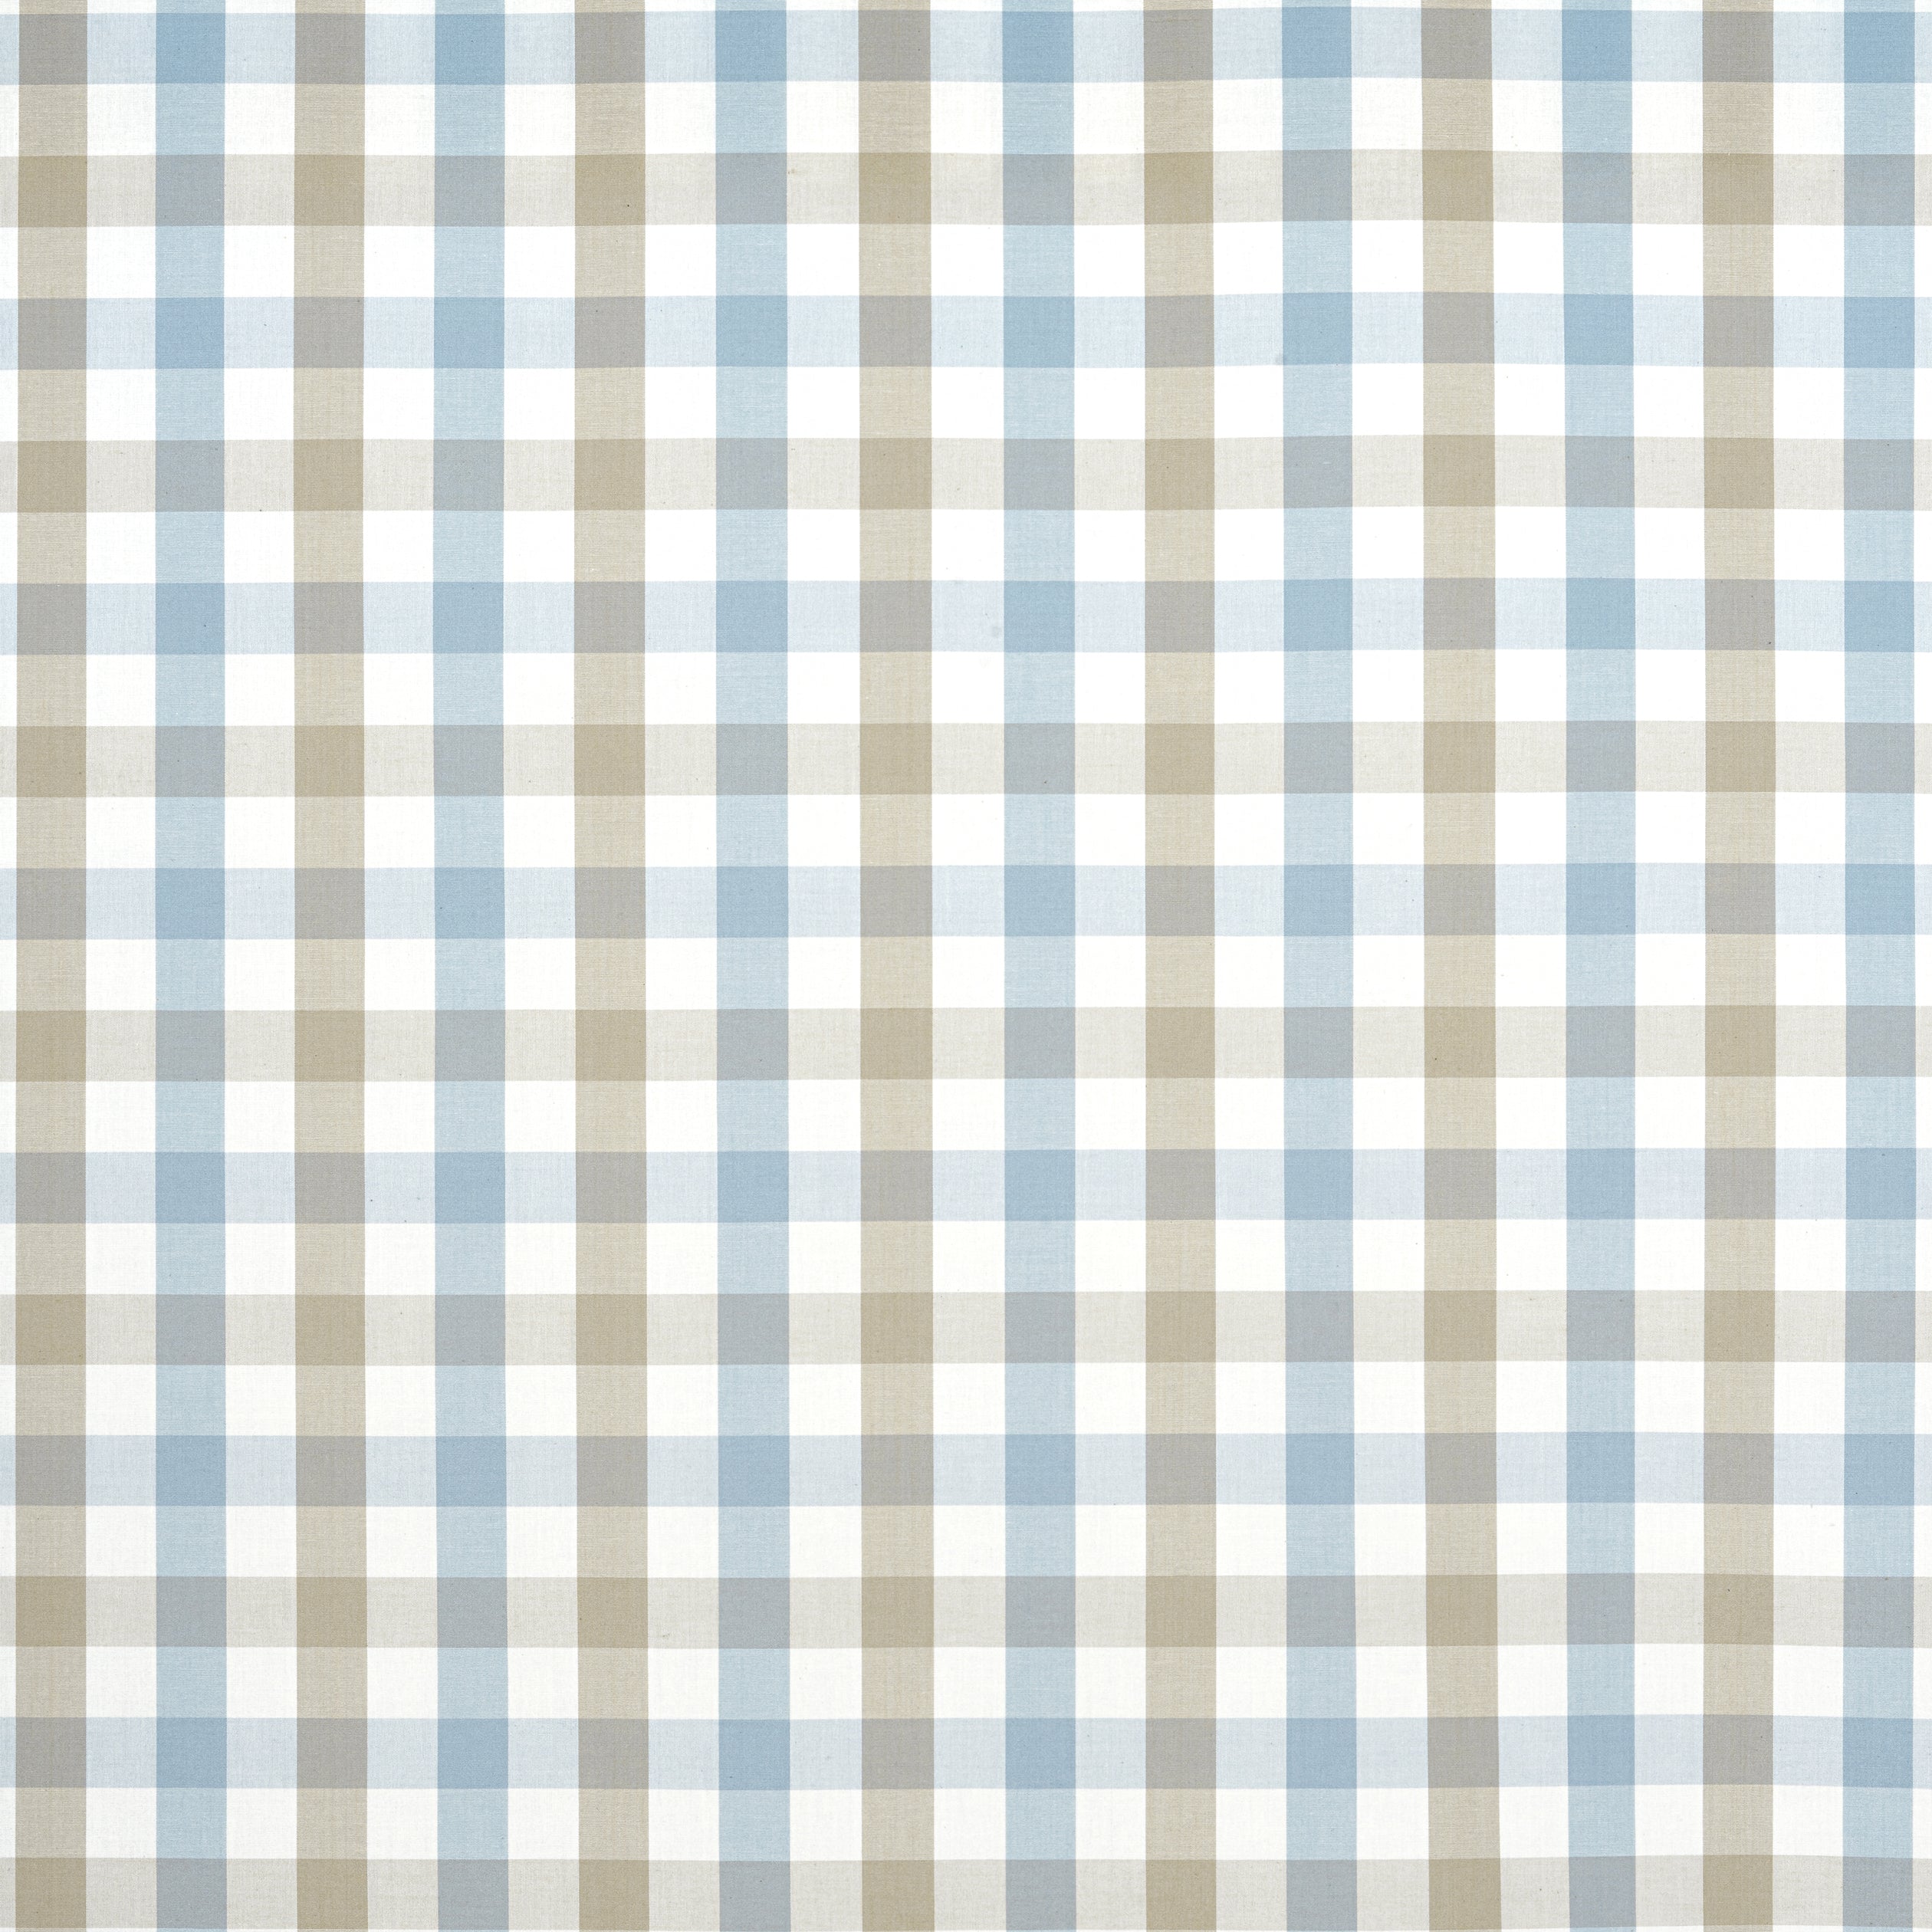 Saybrook Check fabric in spa blue and beige color - pattern number AW15151 - by Anna French in the Antilles collection